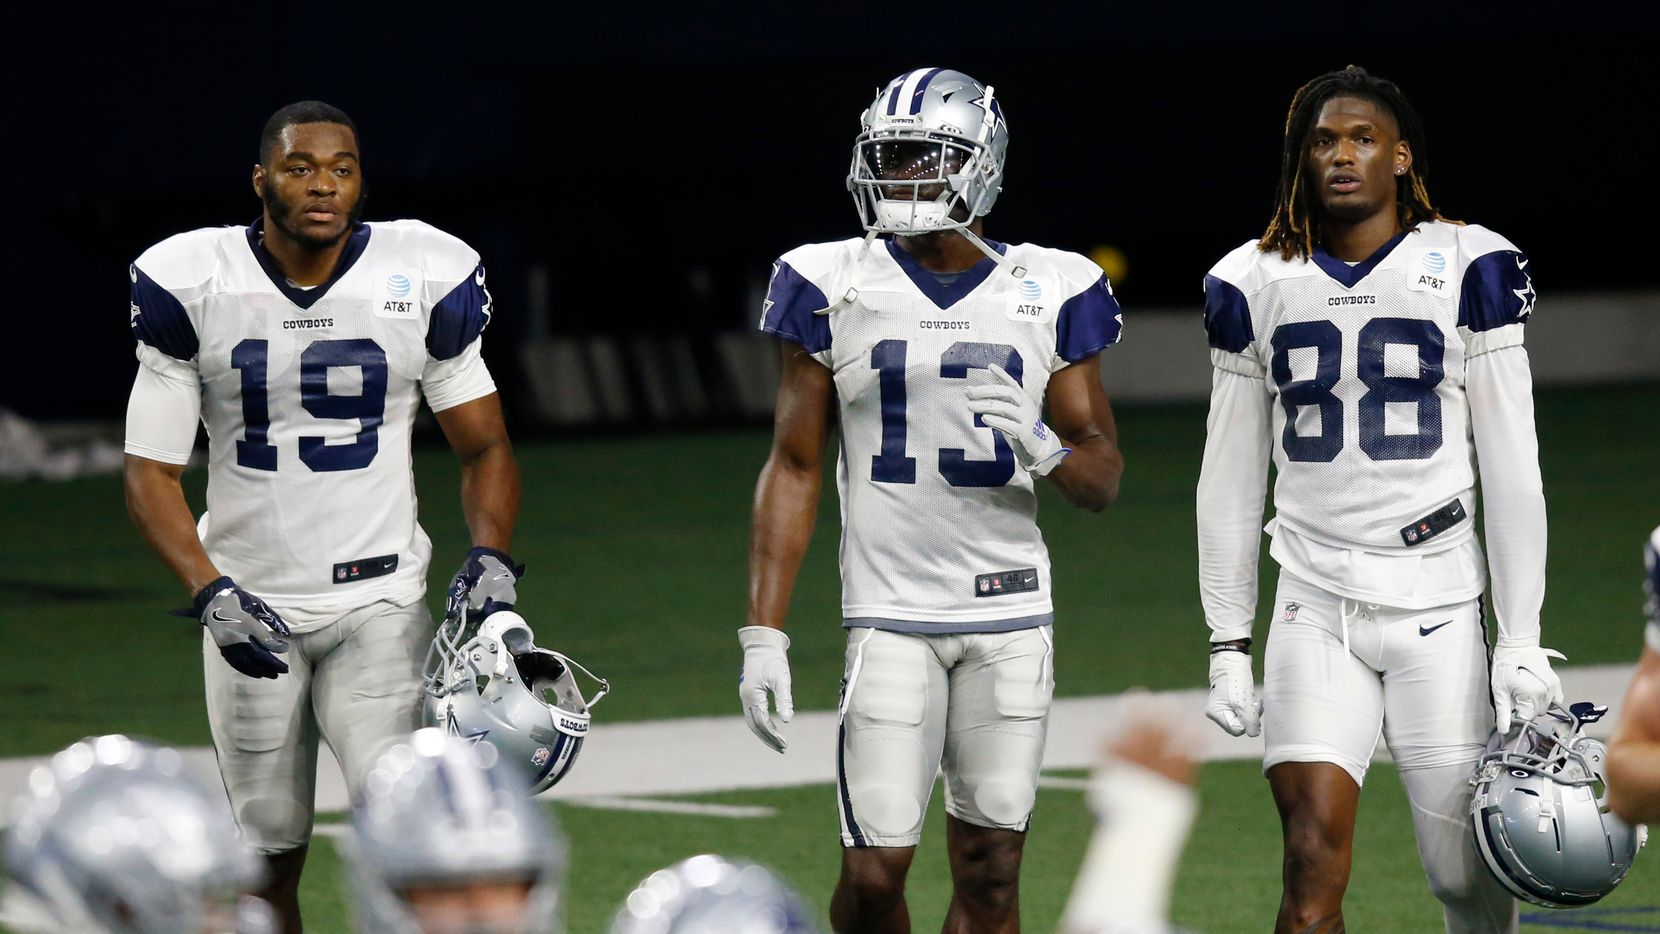 Cowboys wide receivers Amari Cooper (19), Michael Gallup (13) and CeeDee Lamb (88) are pictured during training camp at The Star in Frisco on Tuesday, Aug. 18, 2020.(Vernon Bryant / Staff Photographer)